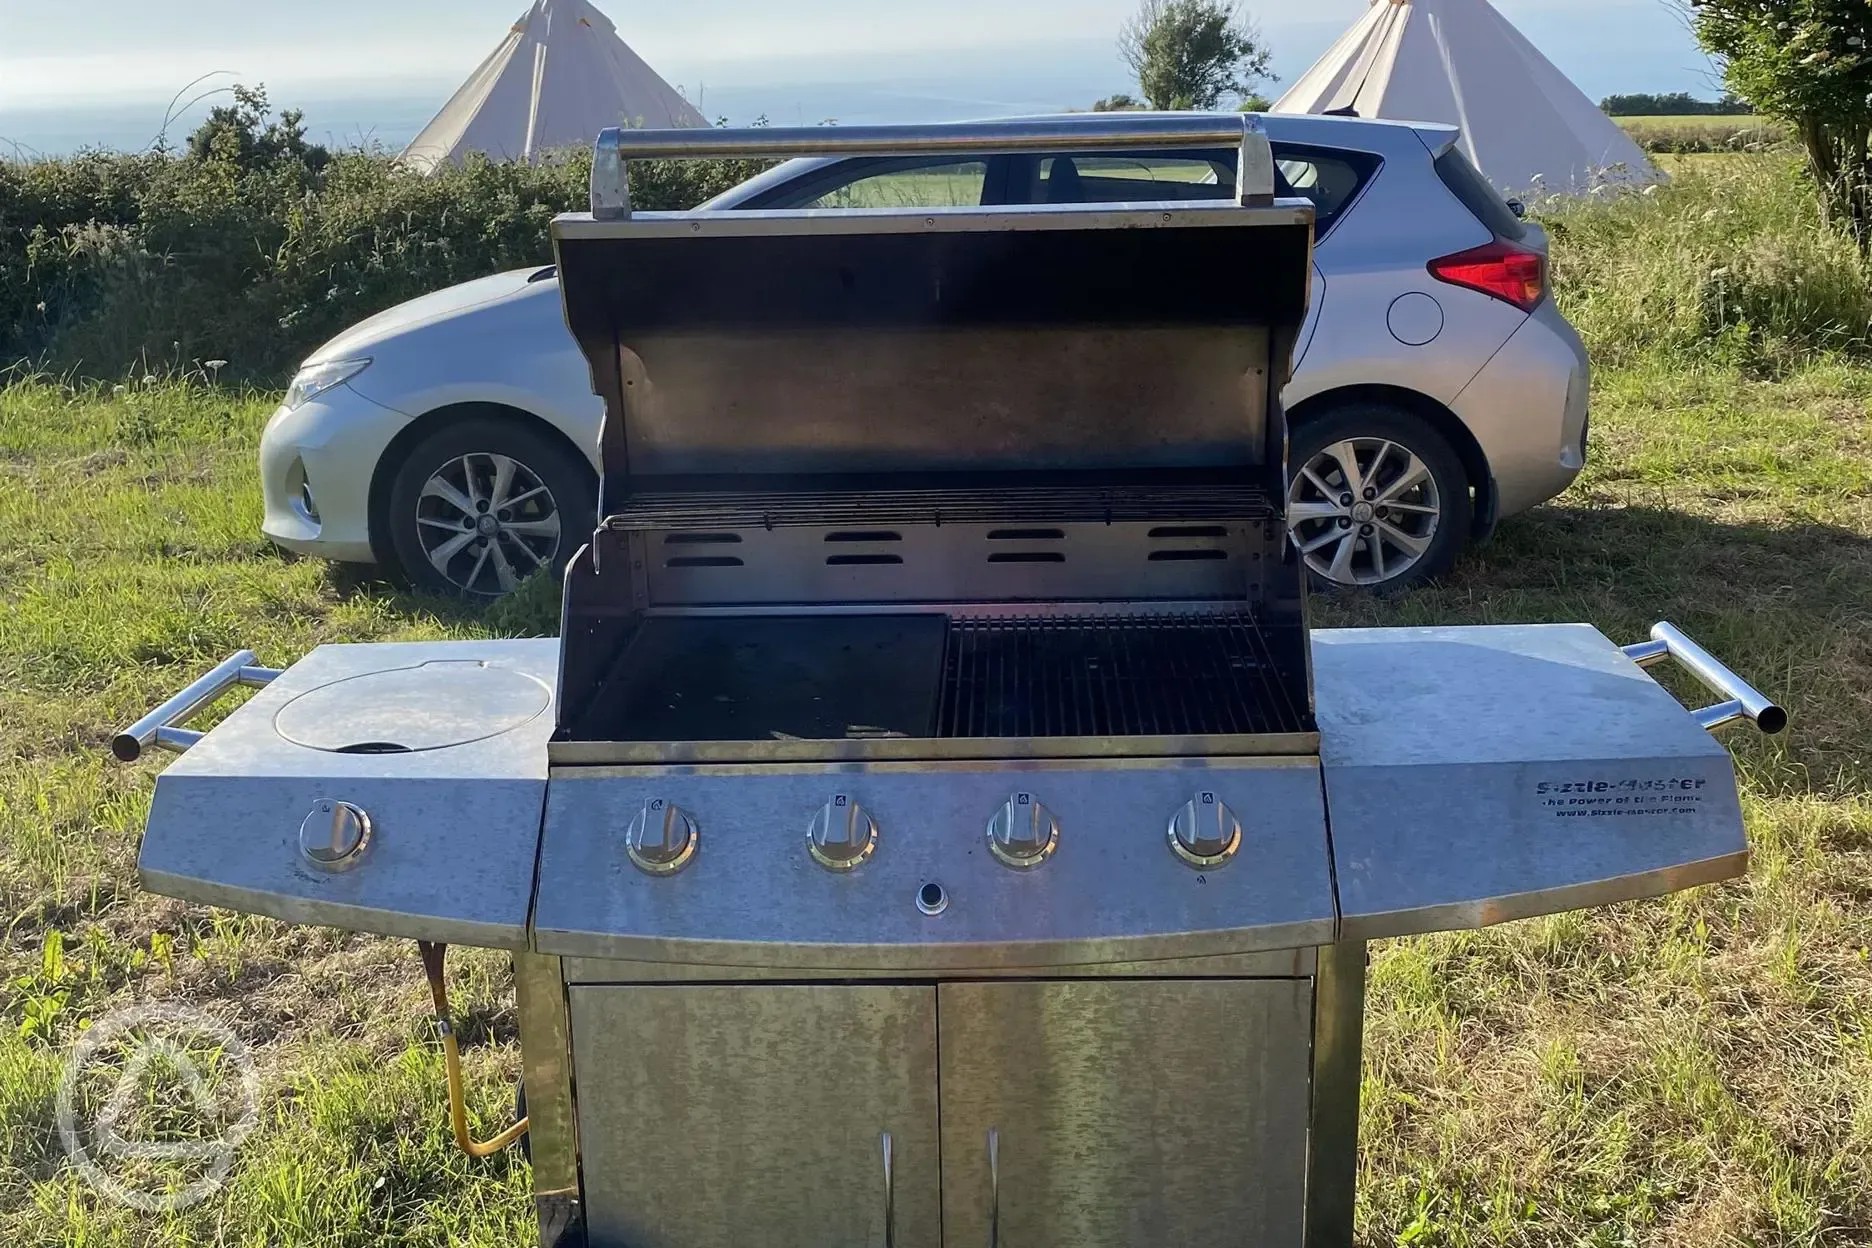 Large gas barbecue, breakfast sharing